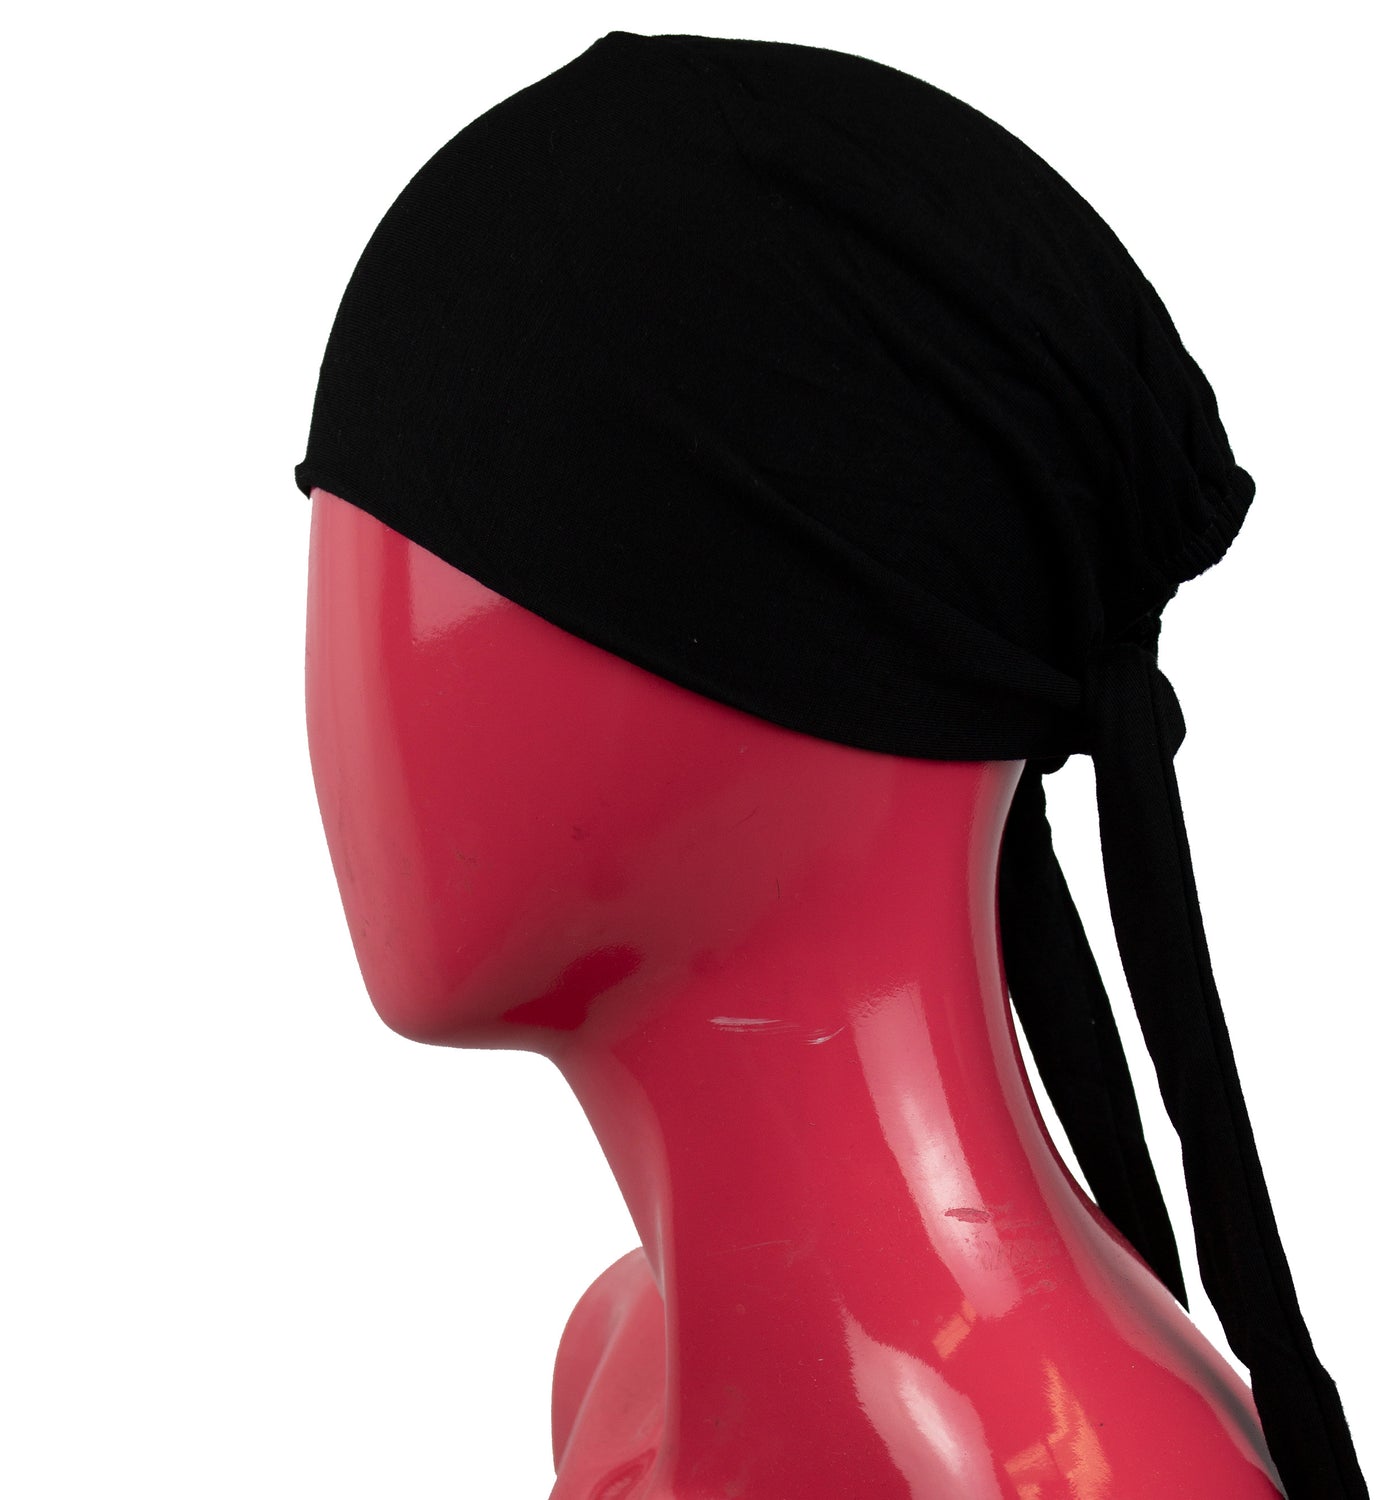 tie back under cap in black that covers around the hair with two strings to tie